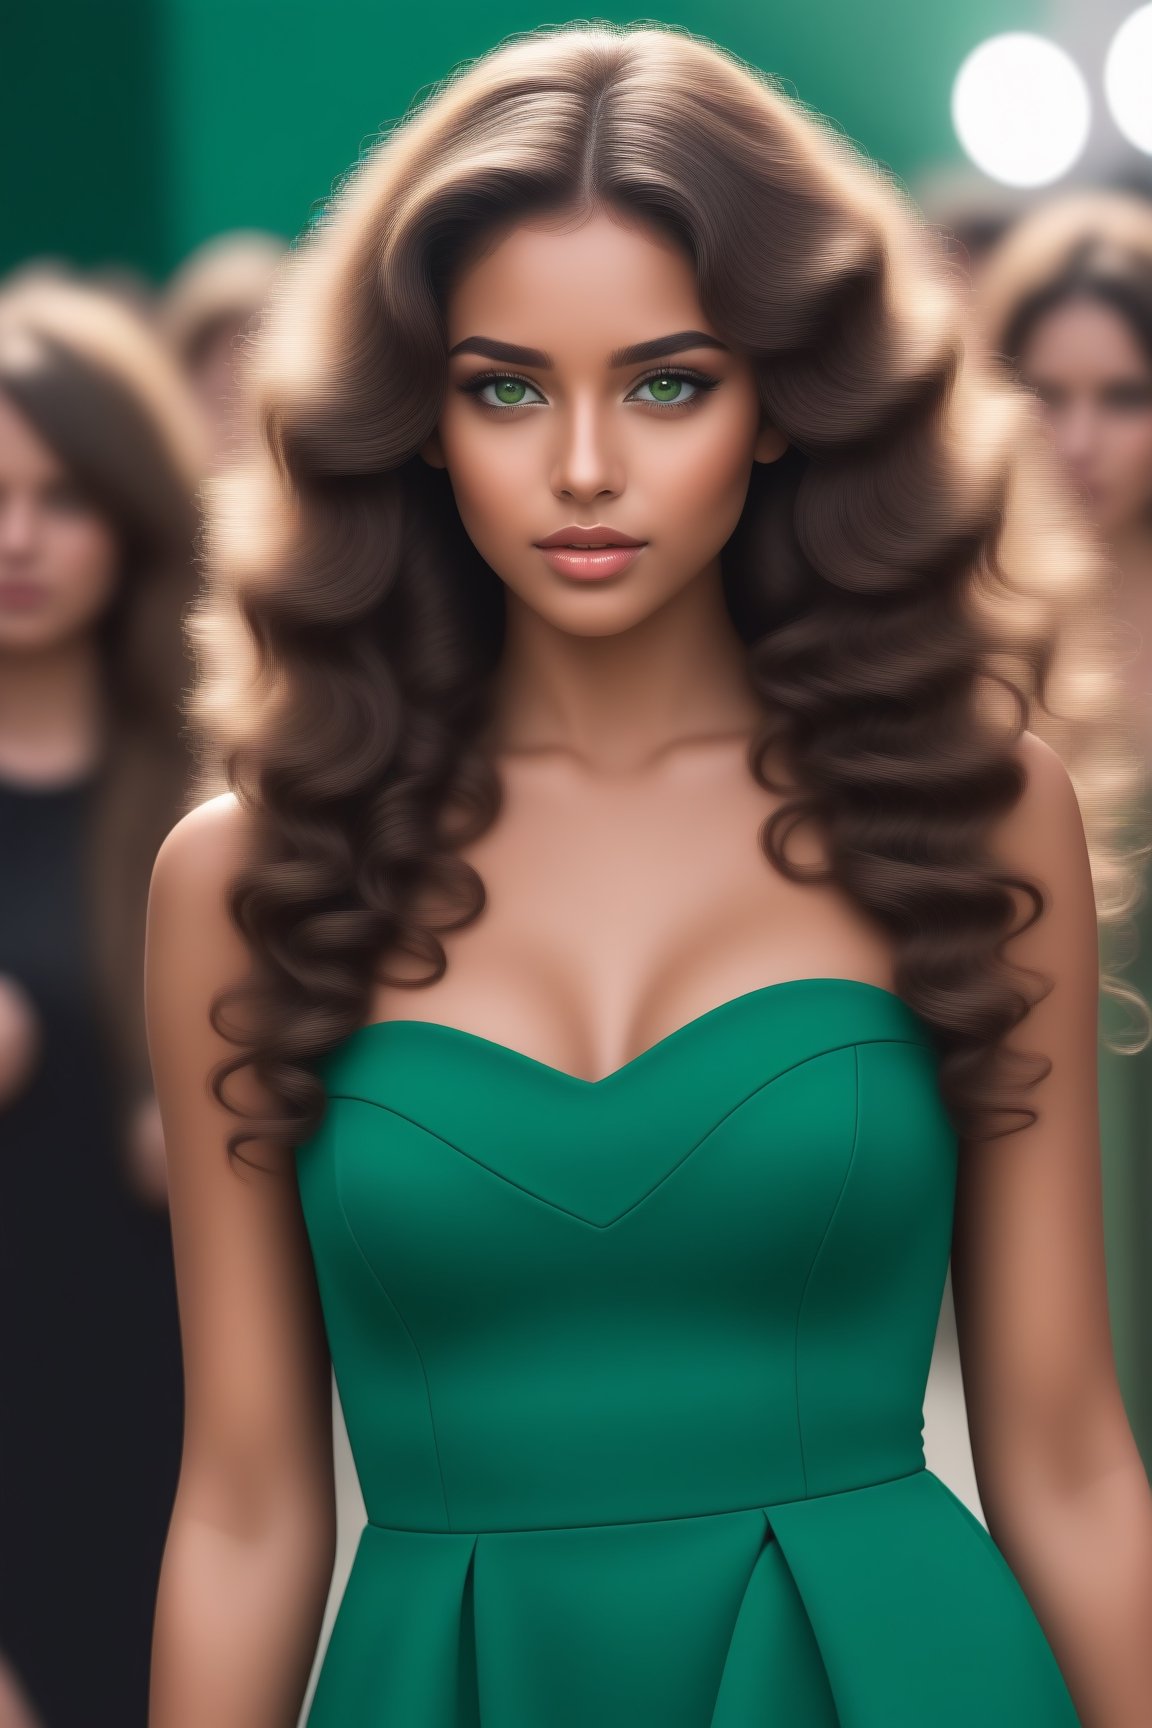 raw realistic cinmatic image of beautiful girl  with brown skin, green eyes,beautiful long curly hair, beautiful round face, perfect face, beautiful face, beautiful hair, long black hair, beautiful face, beautiful green eyes, close up,walking in a fashion show, cat walk, crowd are looking at her, she wearing a deep green elegant gown grainy cinematic, godlyphoto r3al, detailmaster2, aesthetic portrait, cinematic colors, earthy, moody,<lora:659095807385103906:1.0>